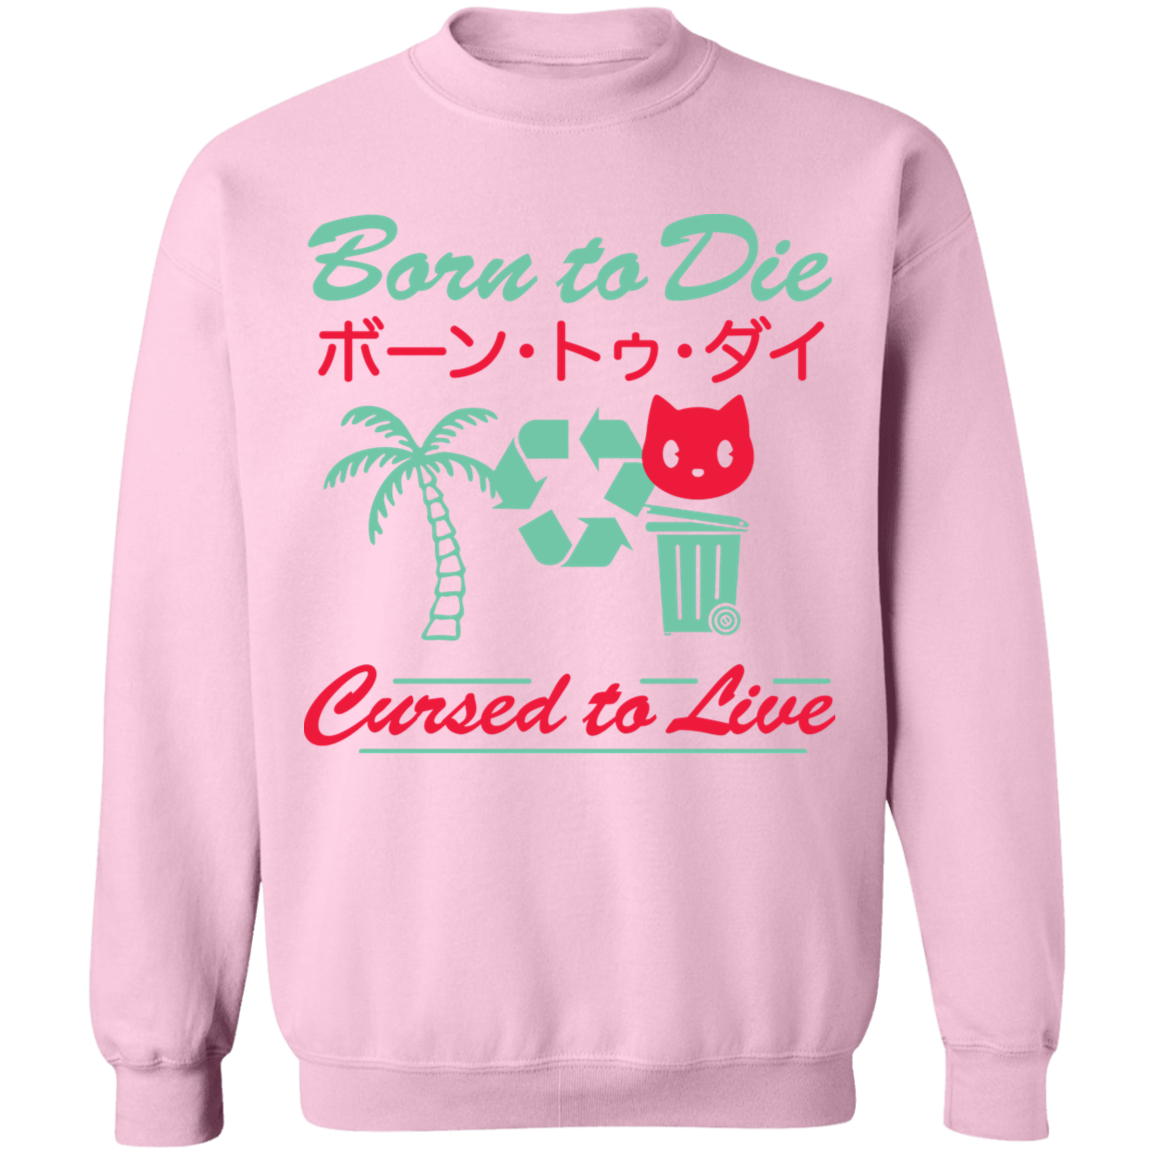 Born to Die Cursed to Live Jumper